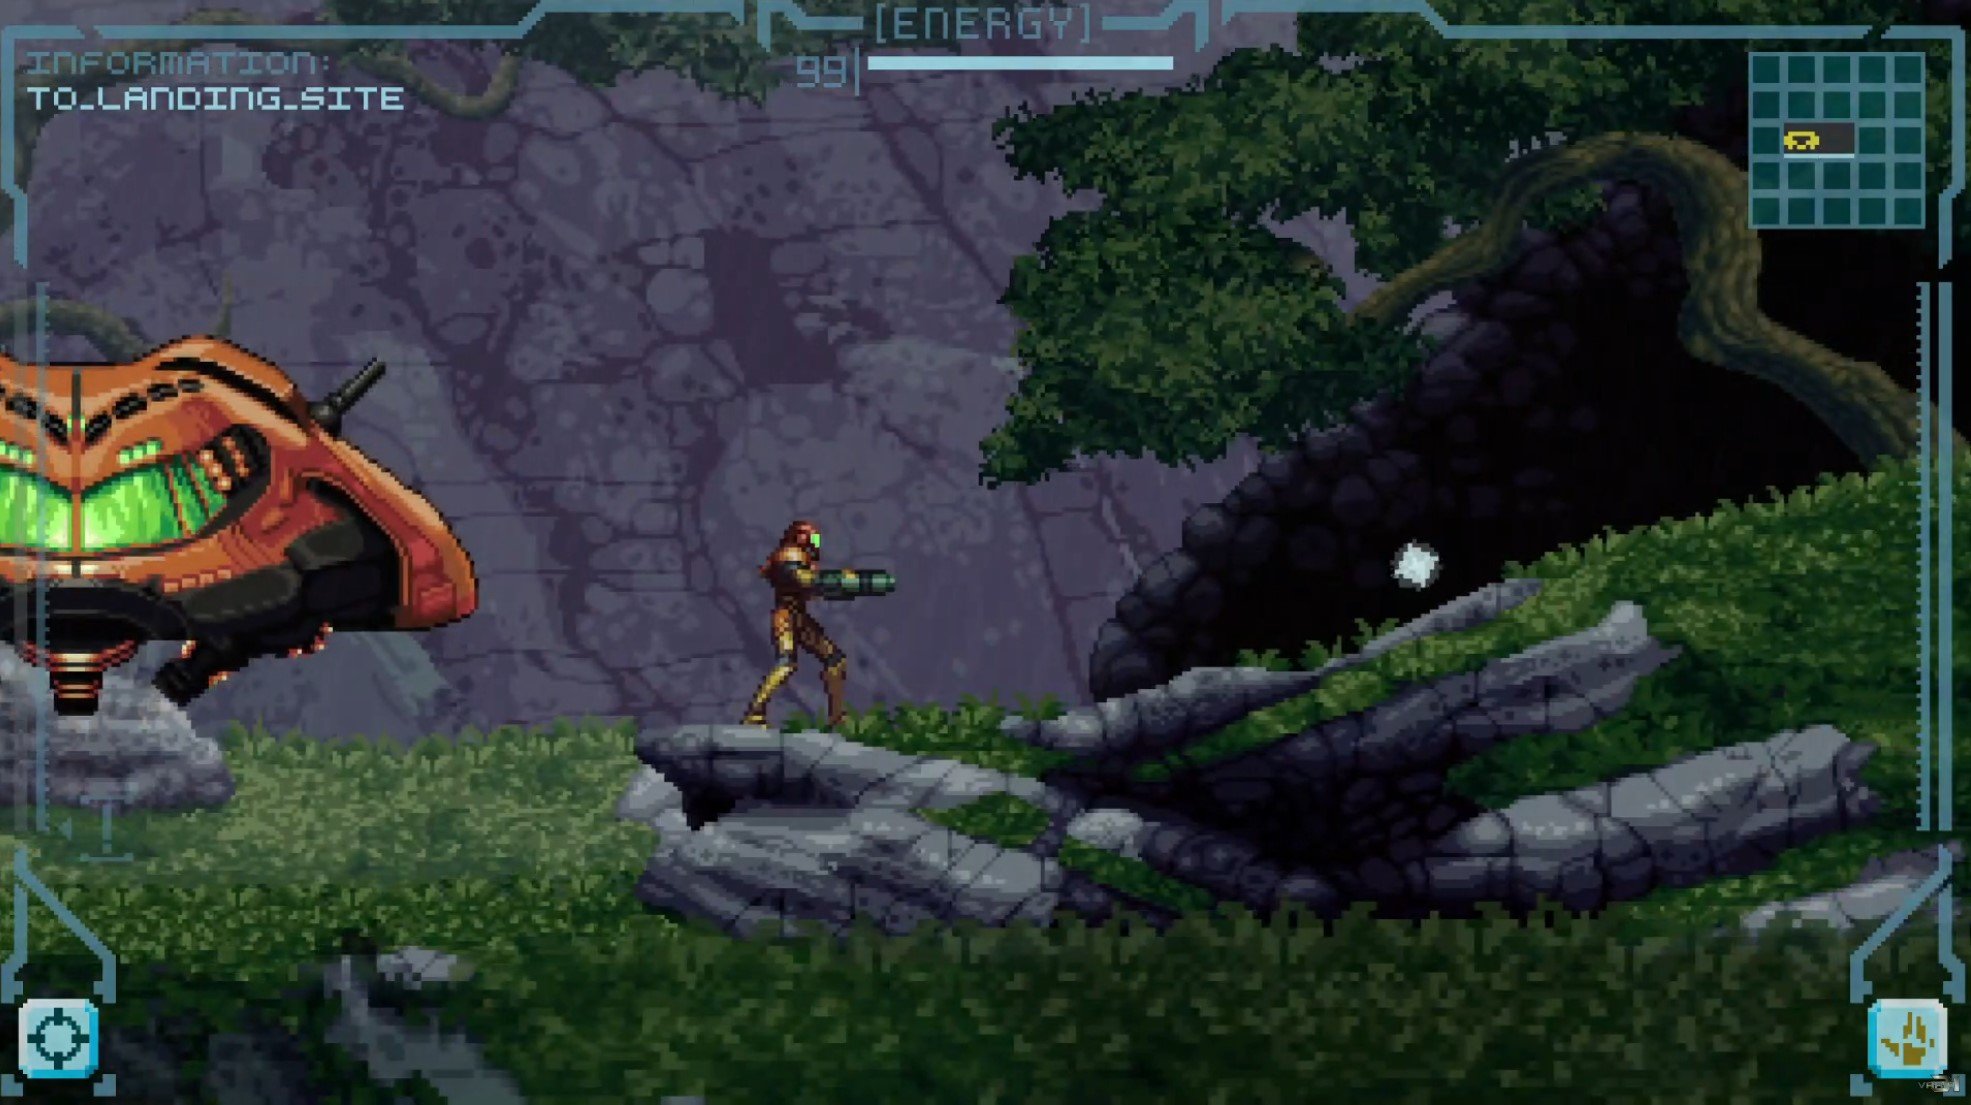 15 years under construction, the Metroid Prime 2D fan project has a playable demo